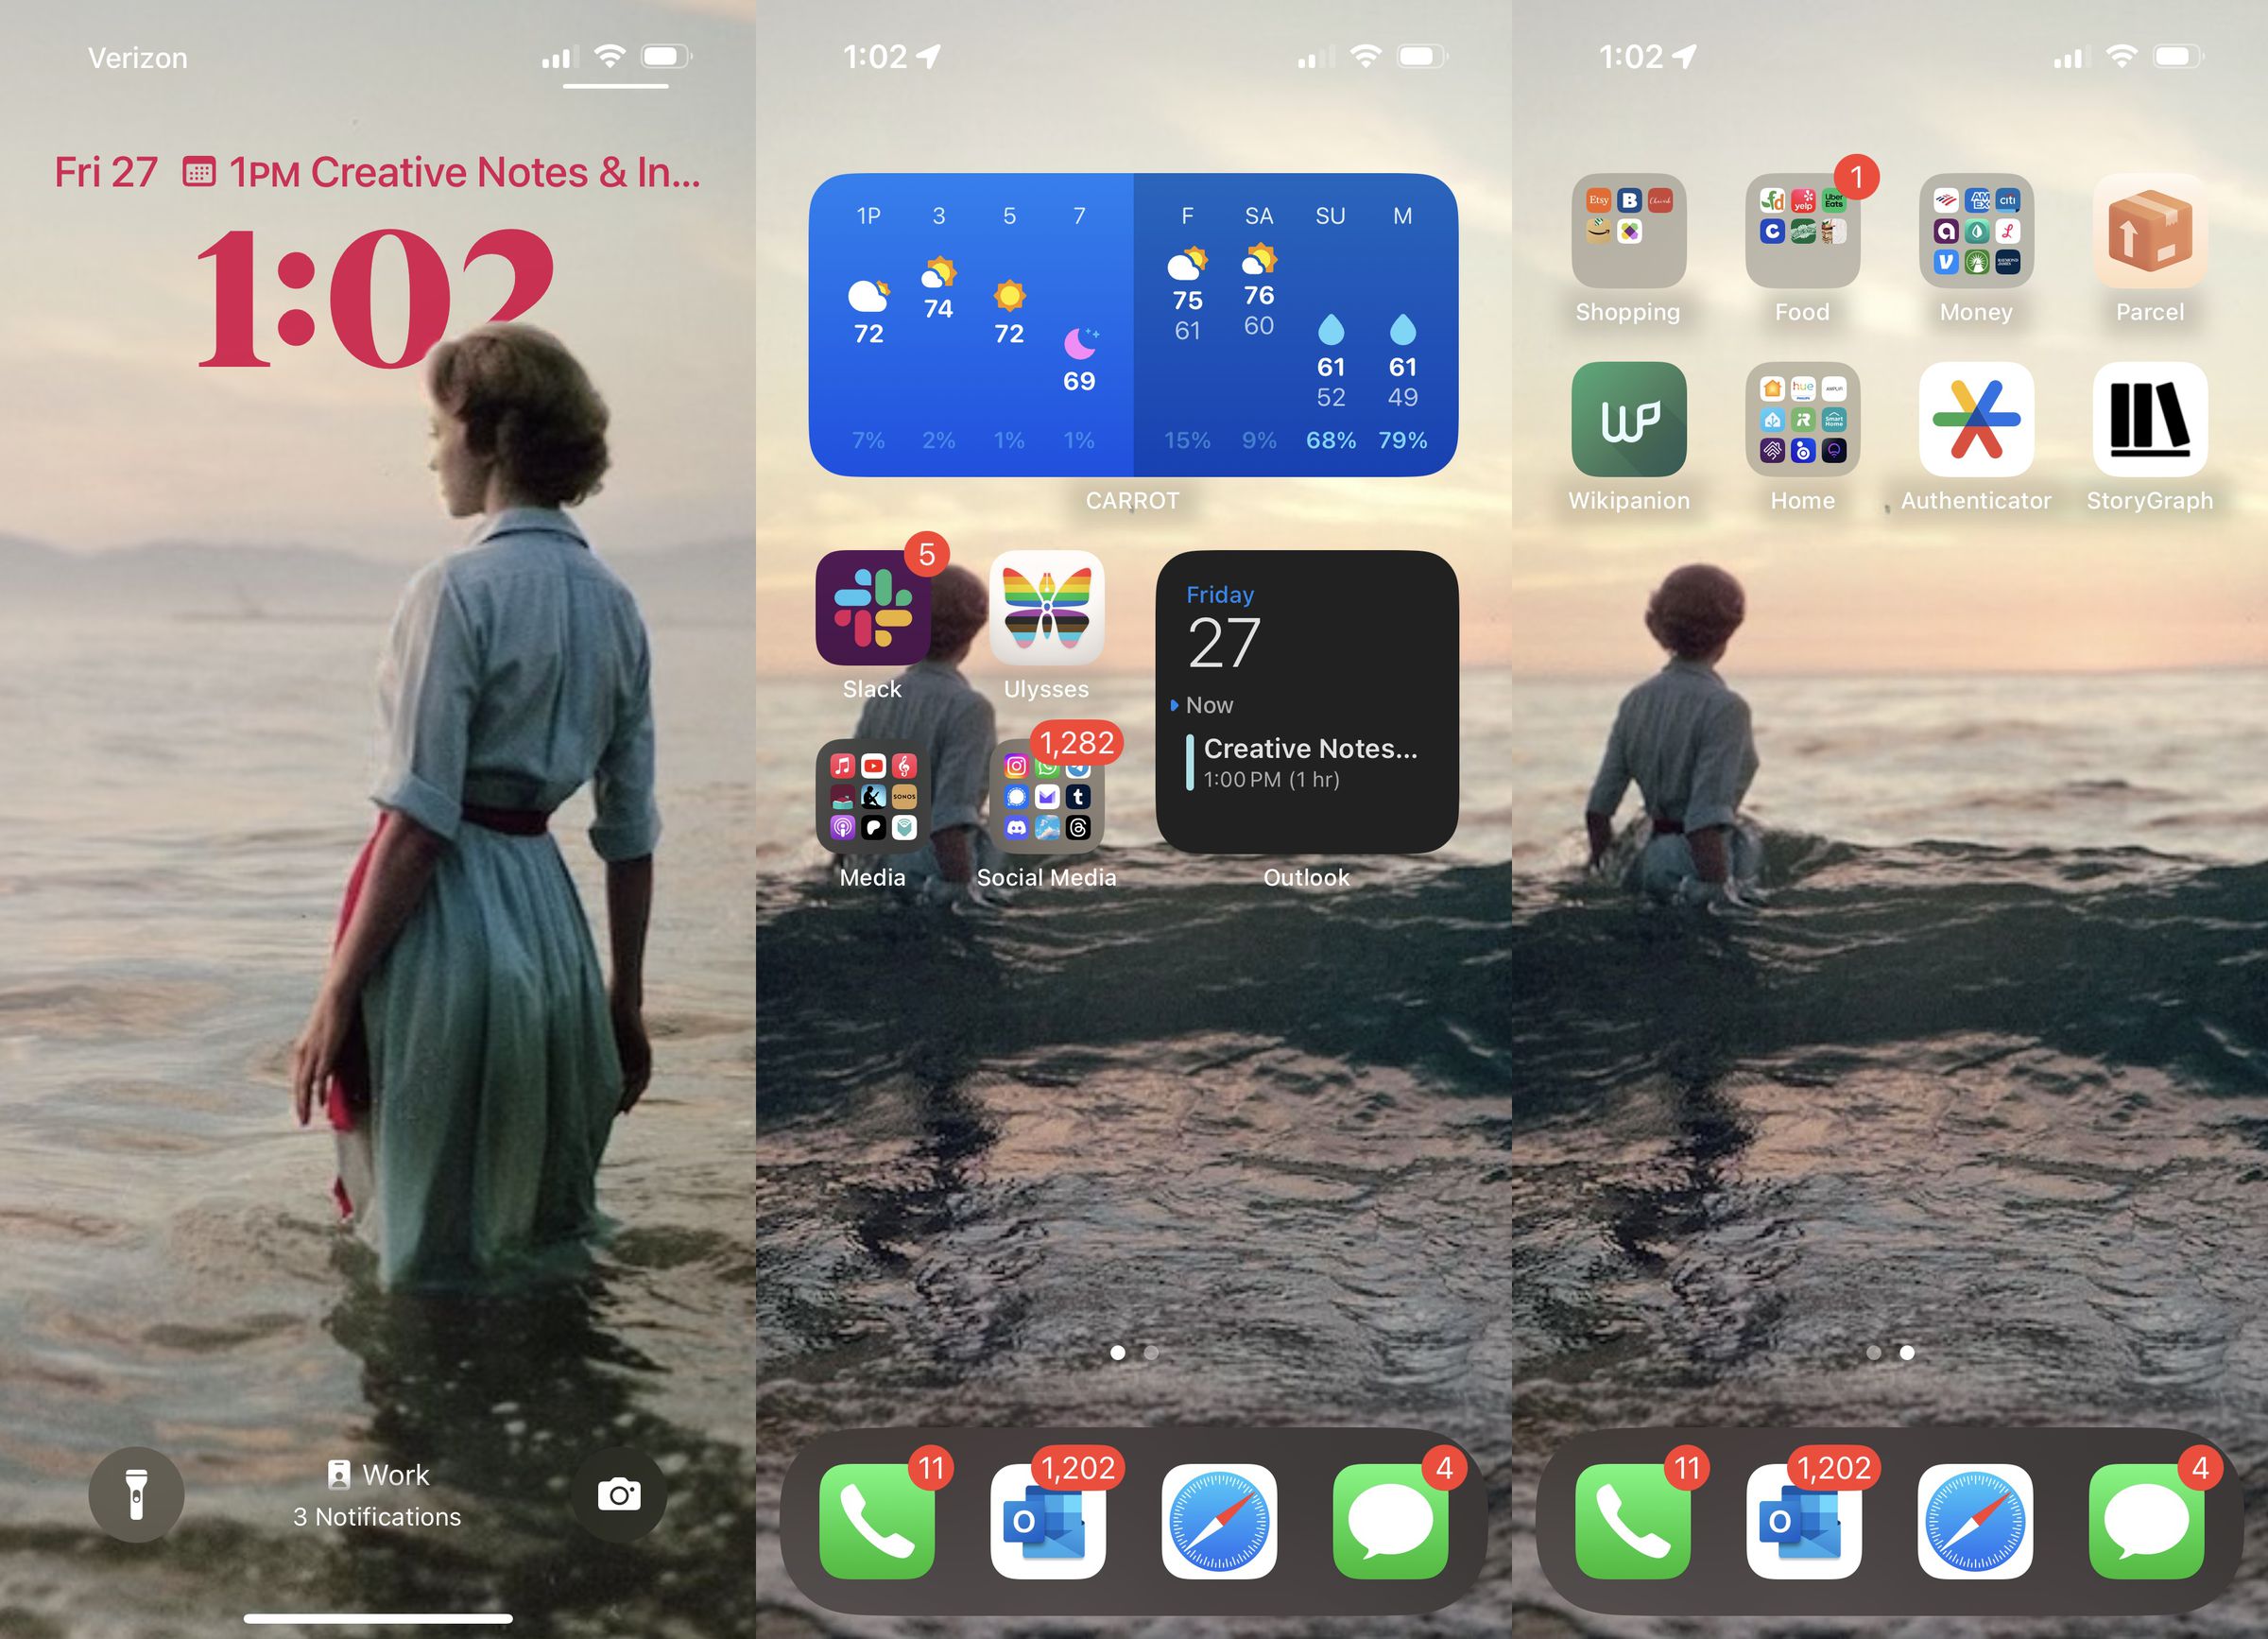 Three panels of a homescreen from an iPhone